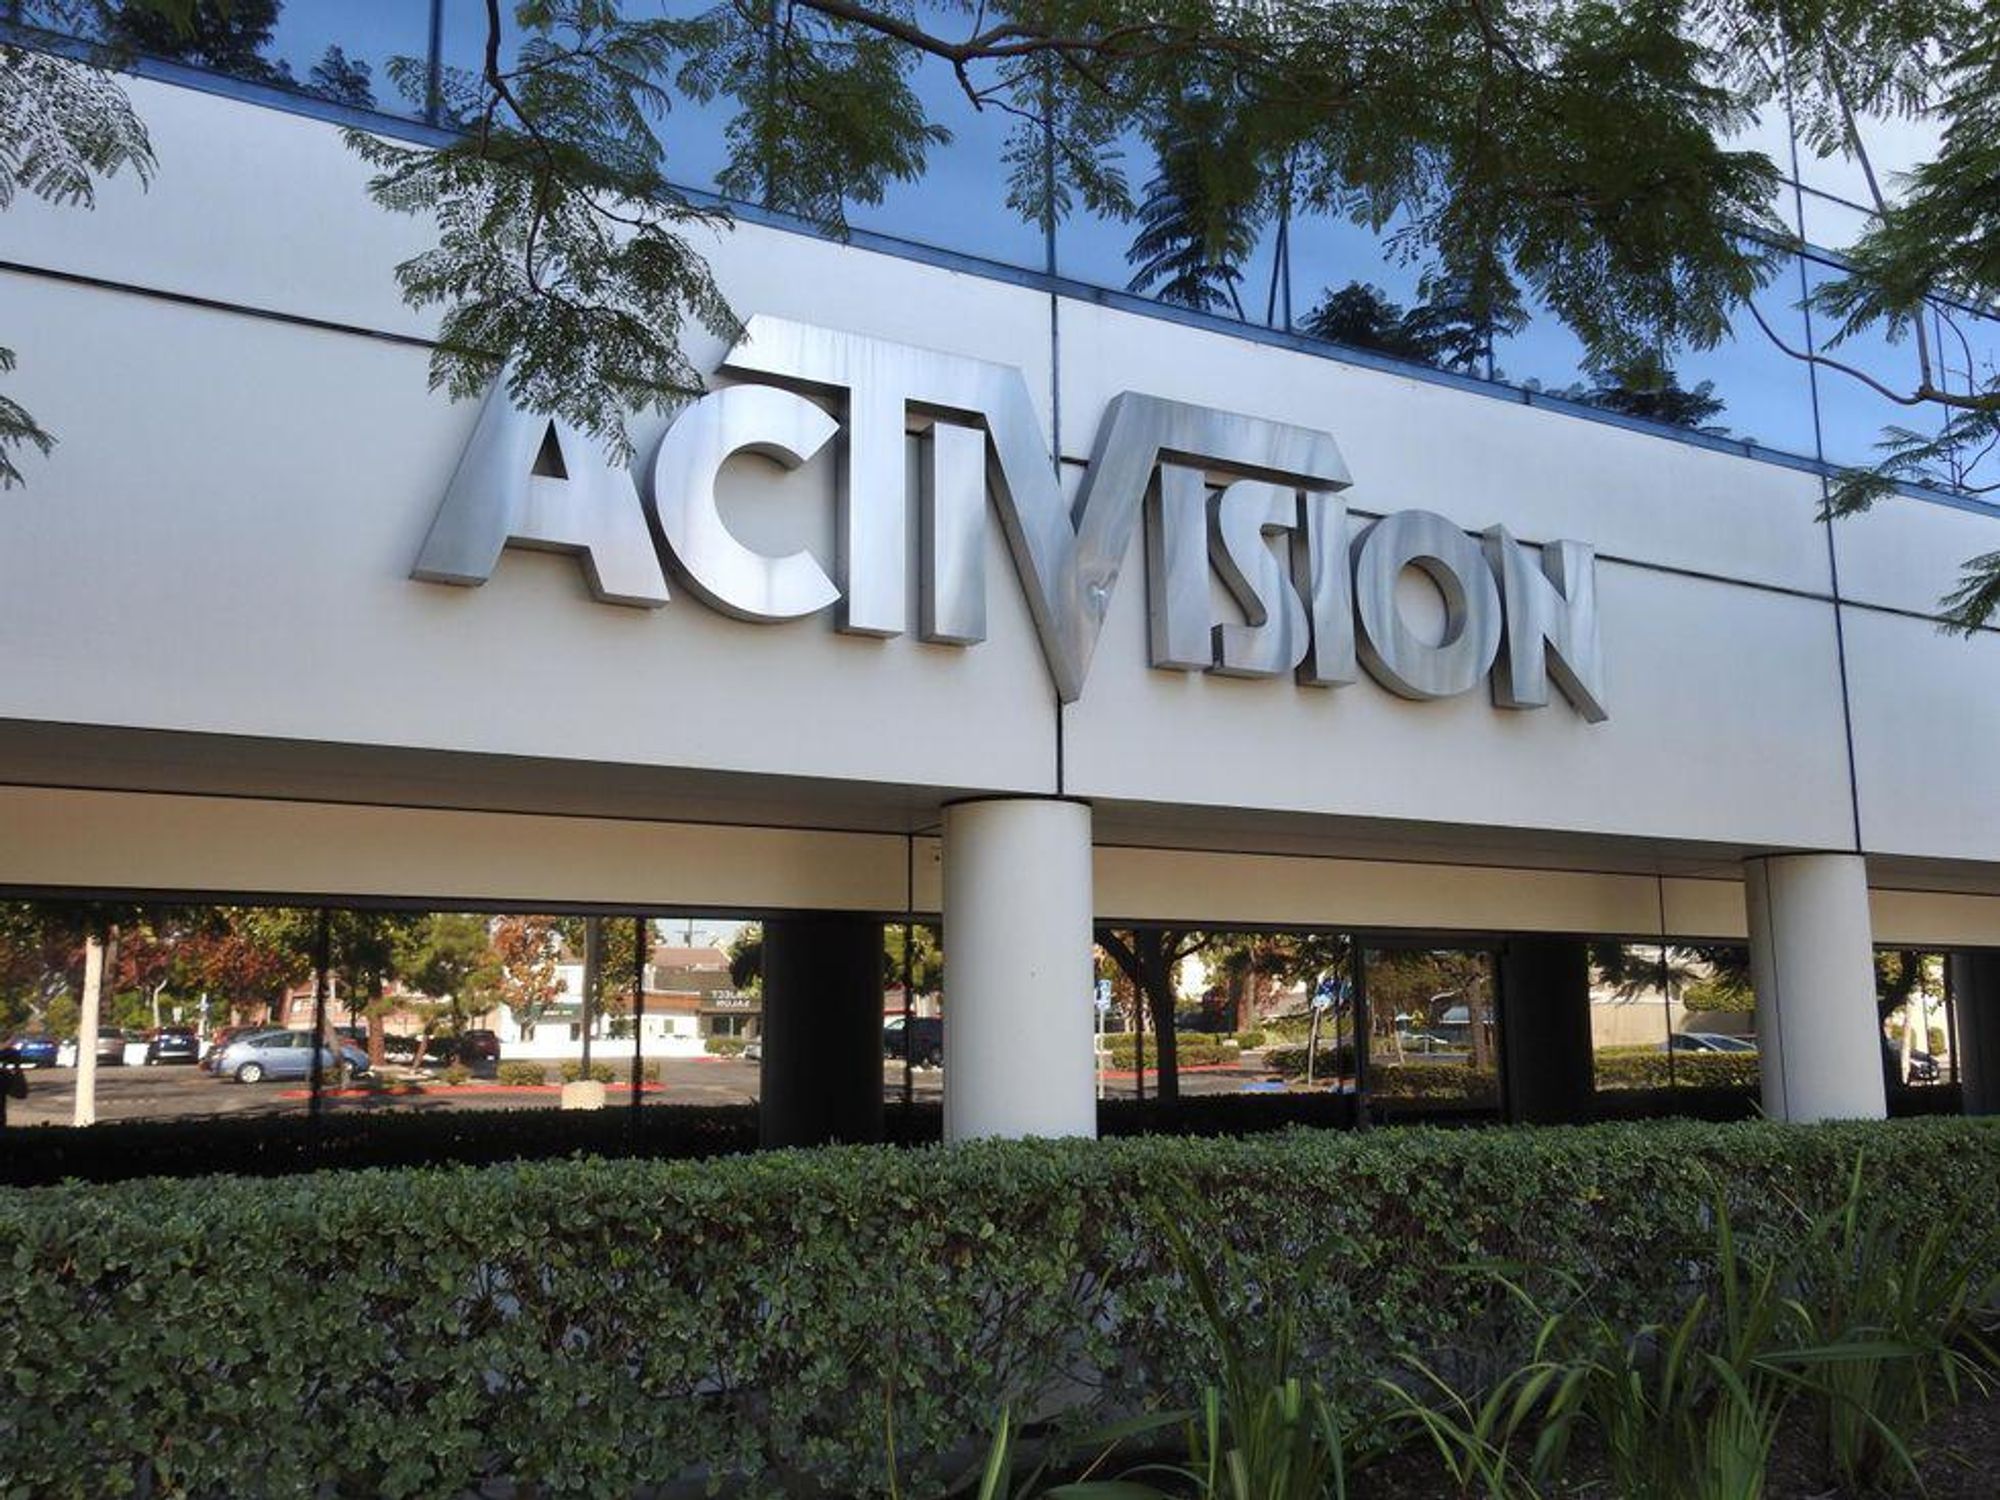 Family Sues Activision, Claims Sexual Harassment Led to Daughter’s Suicide